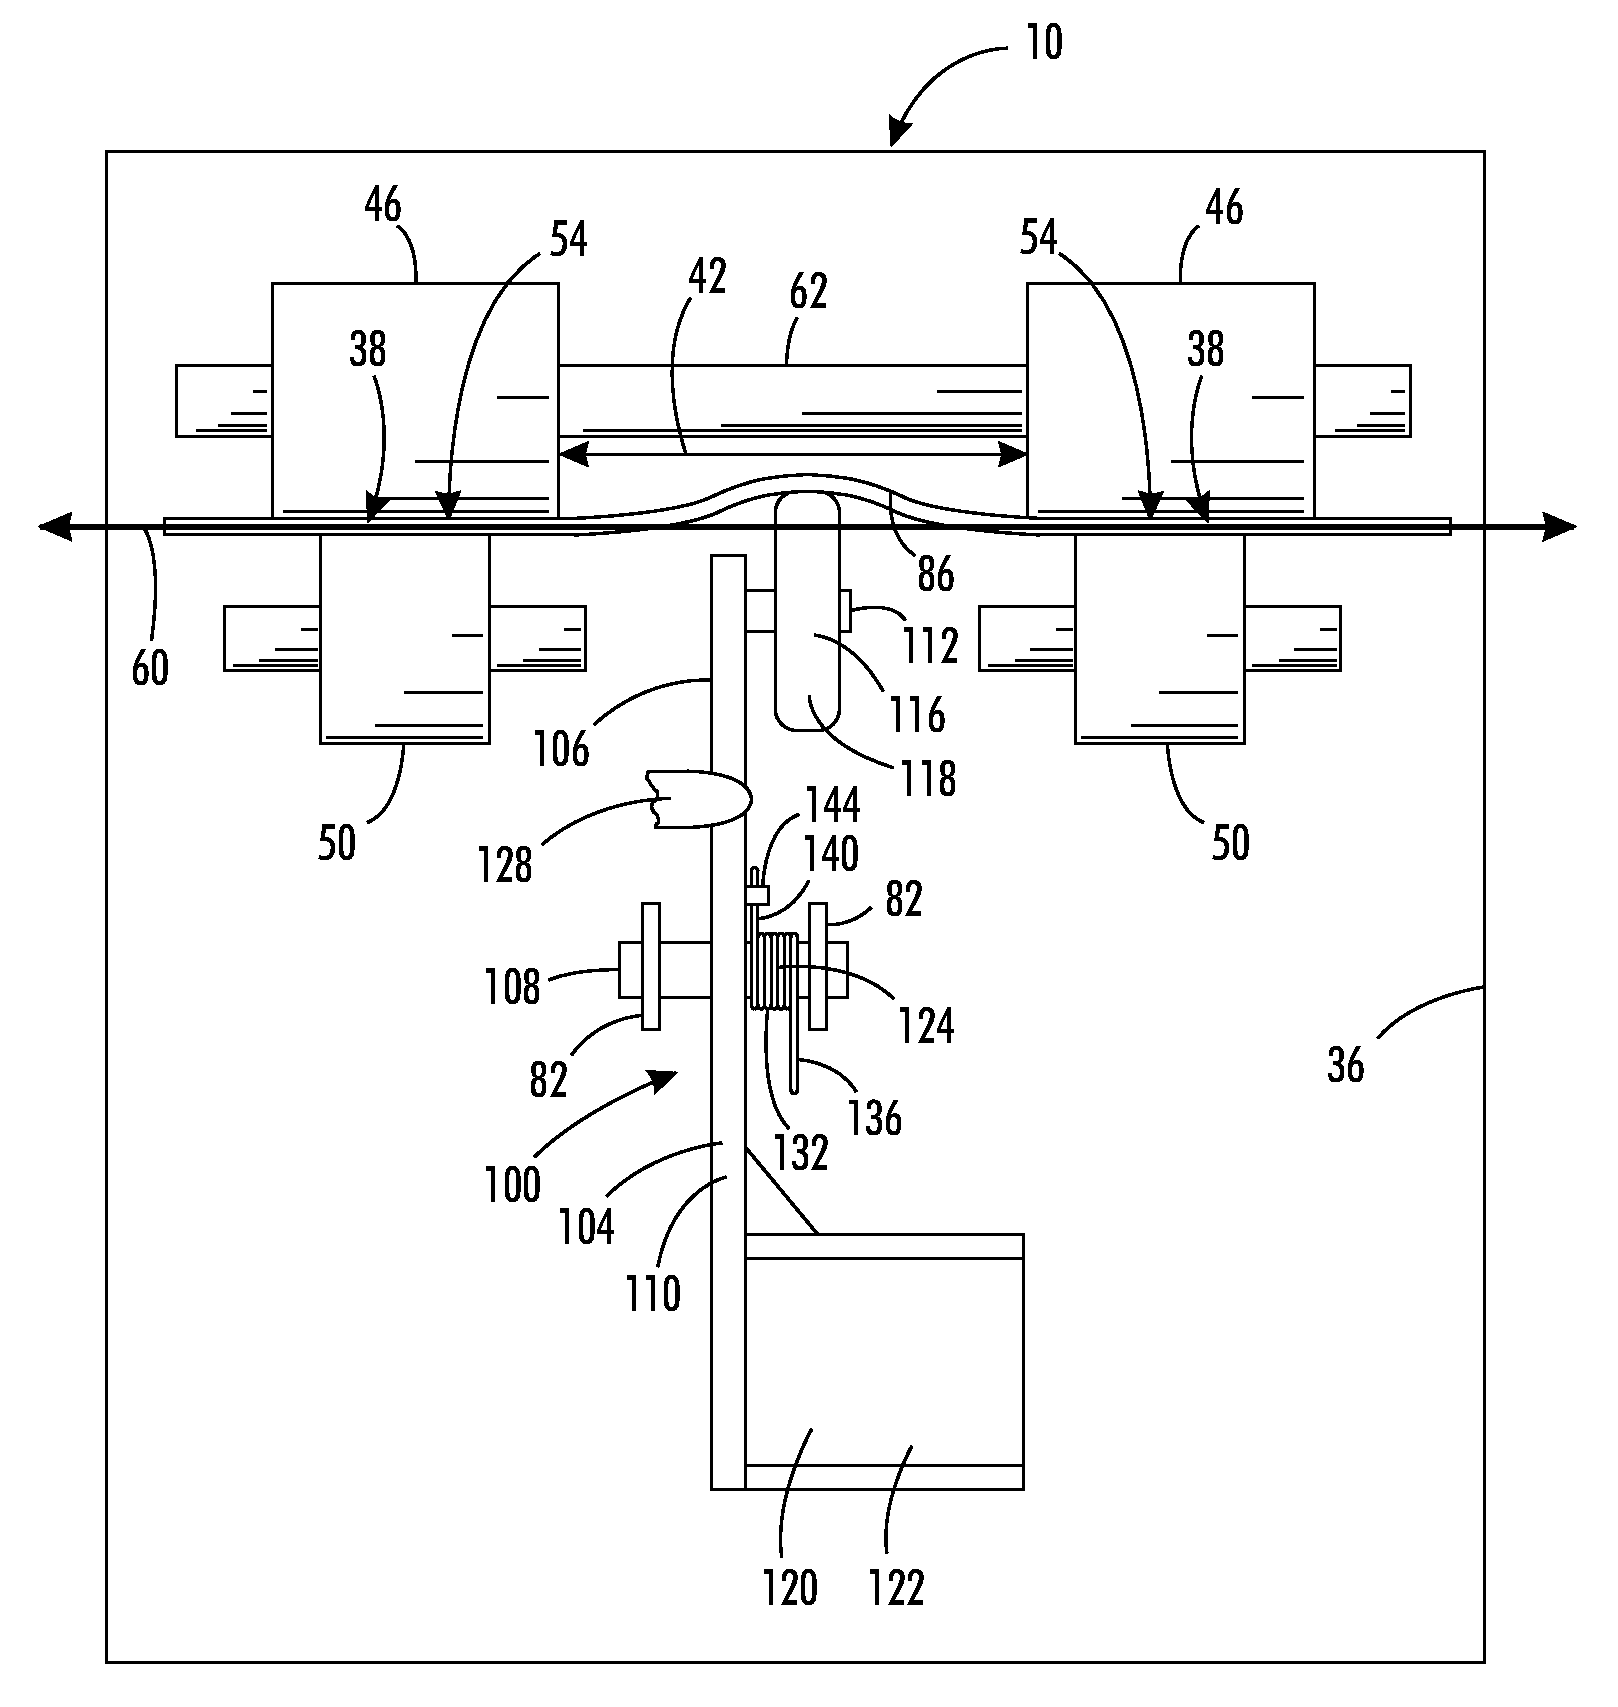 Apparatus and method for temporarily increasing the beam strength of a media sheet in a printer